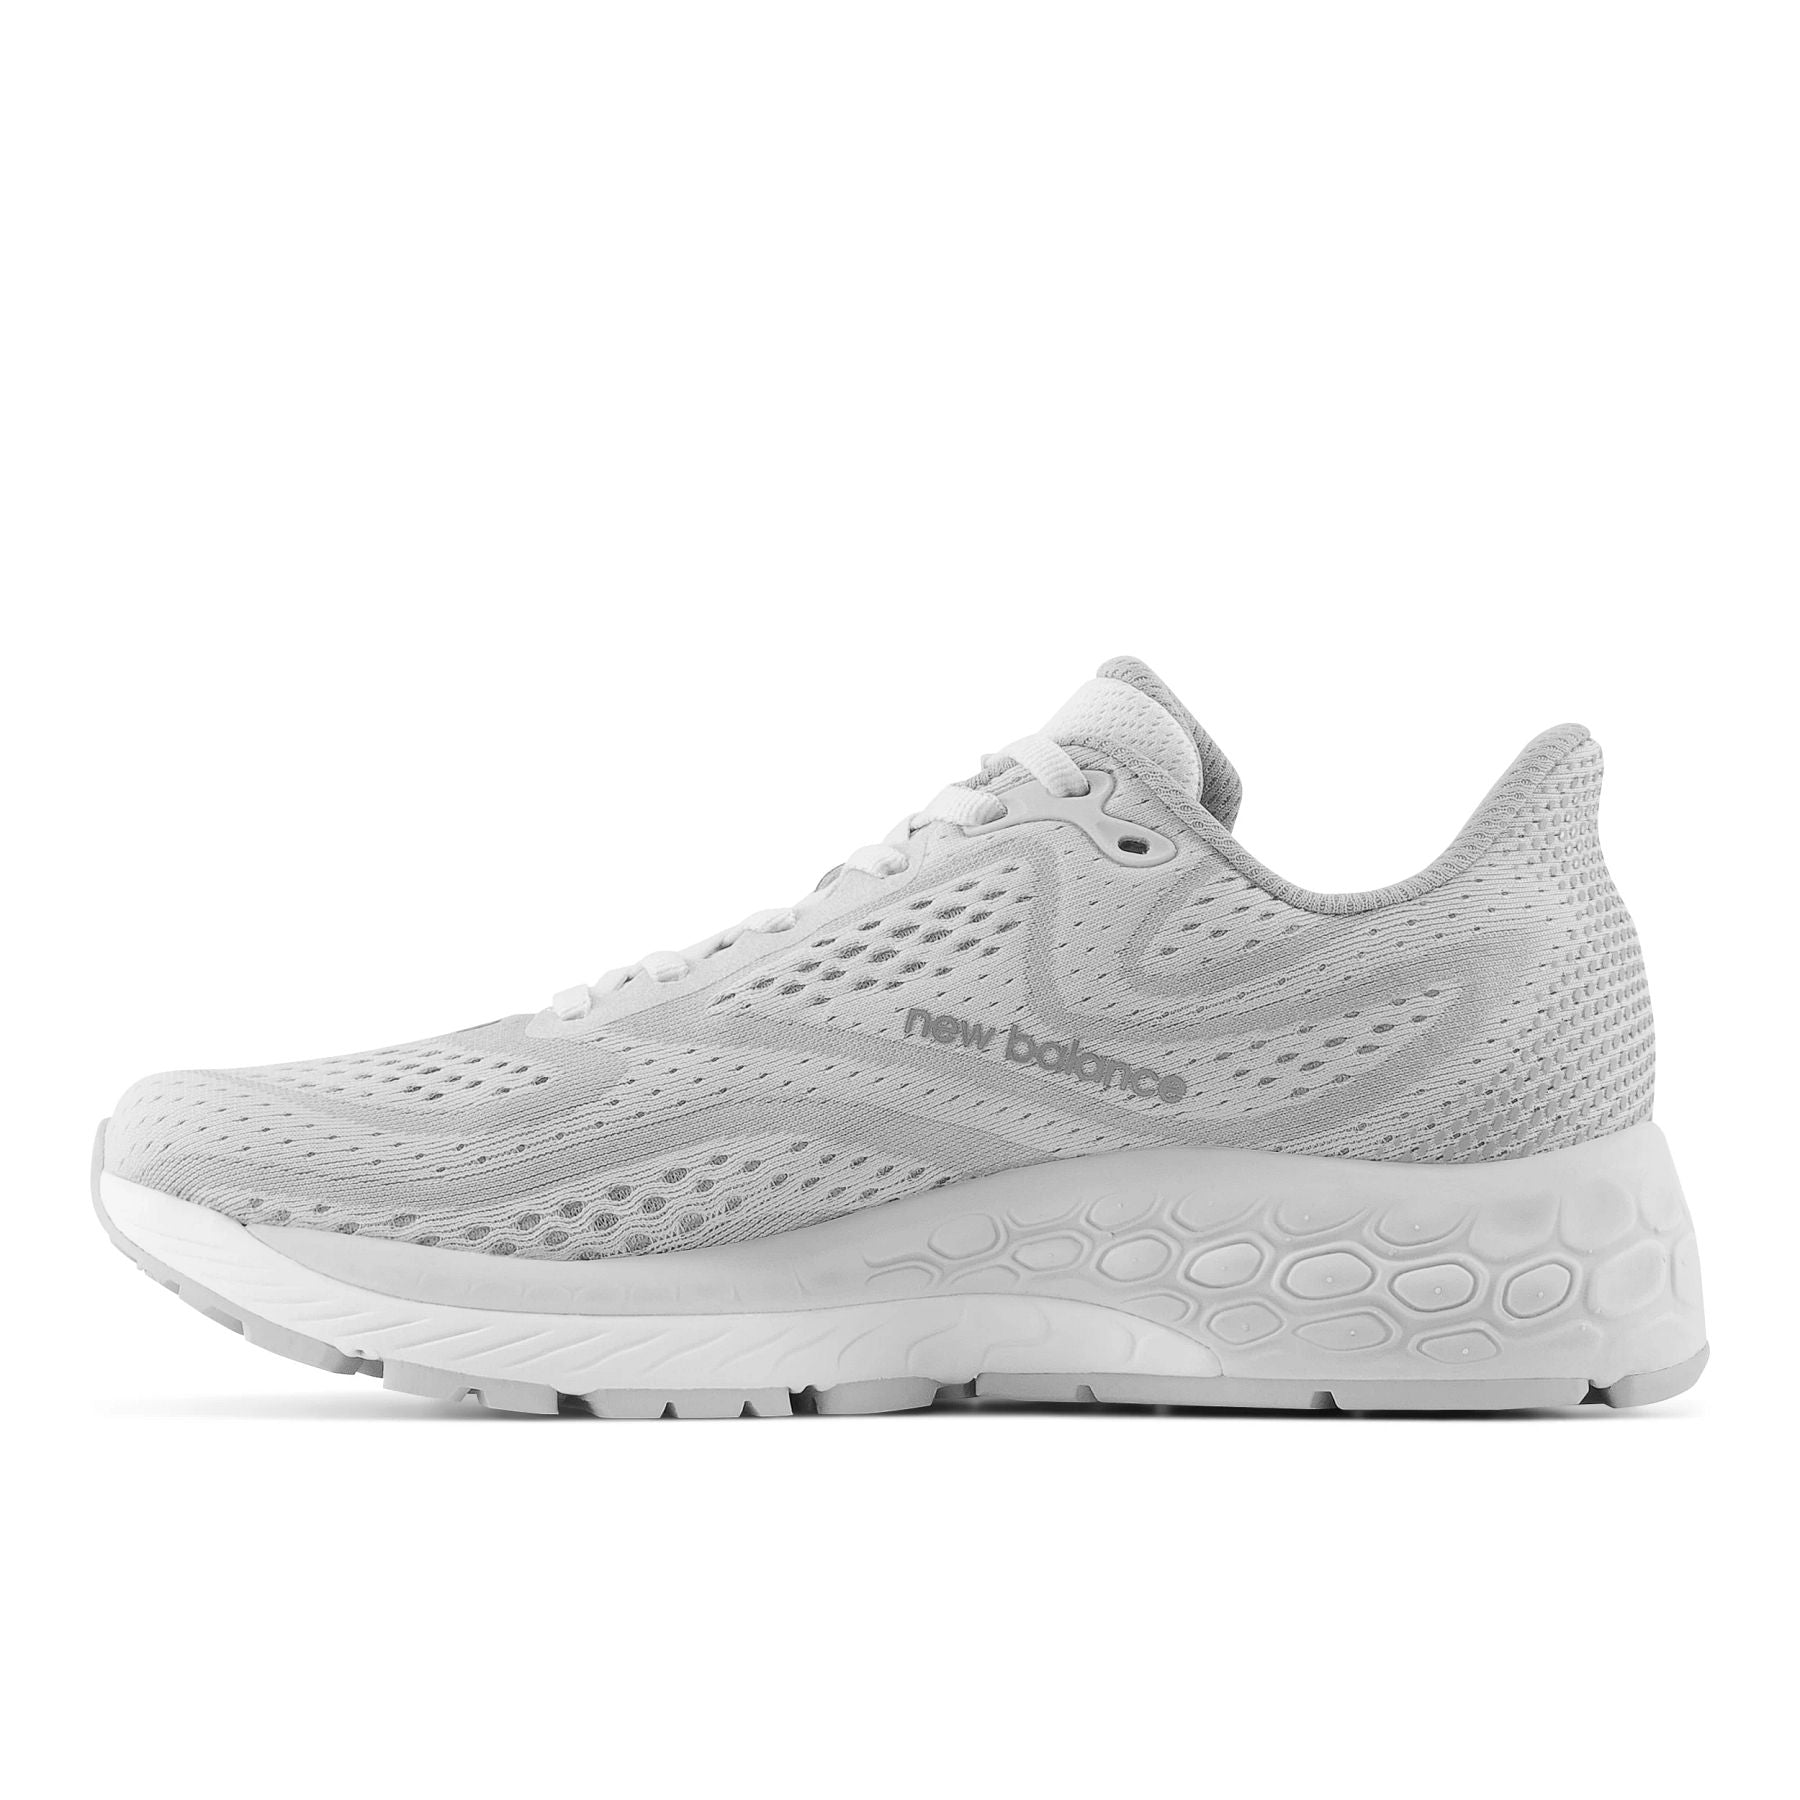 Medial view of the Women's New Balance 880 V13 in the color White